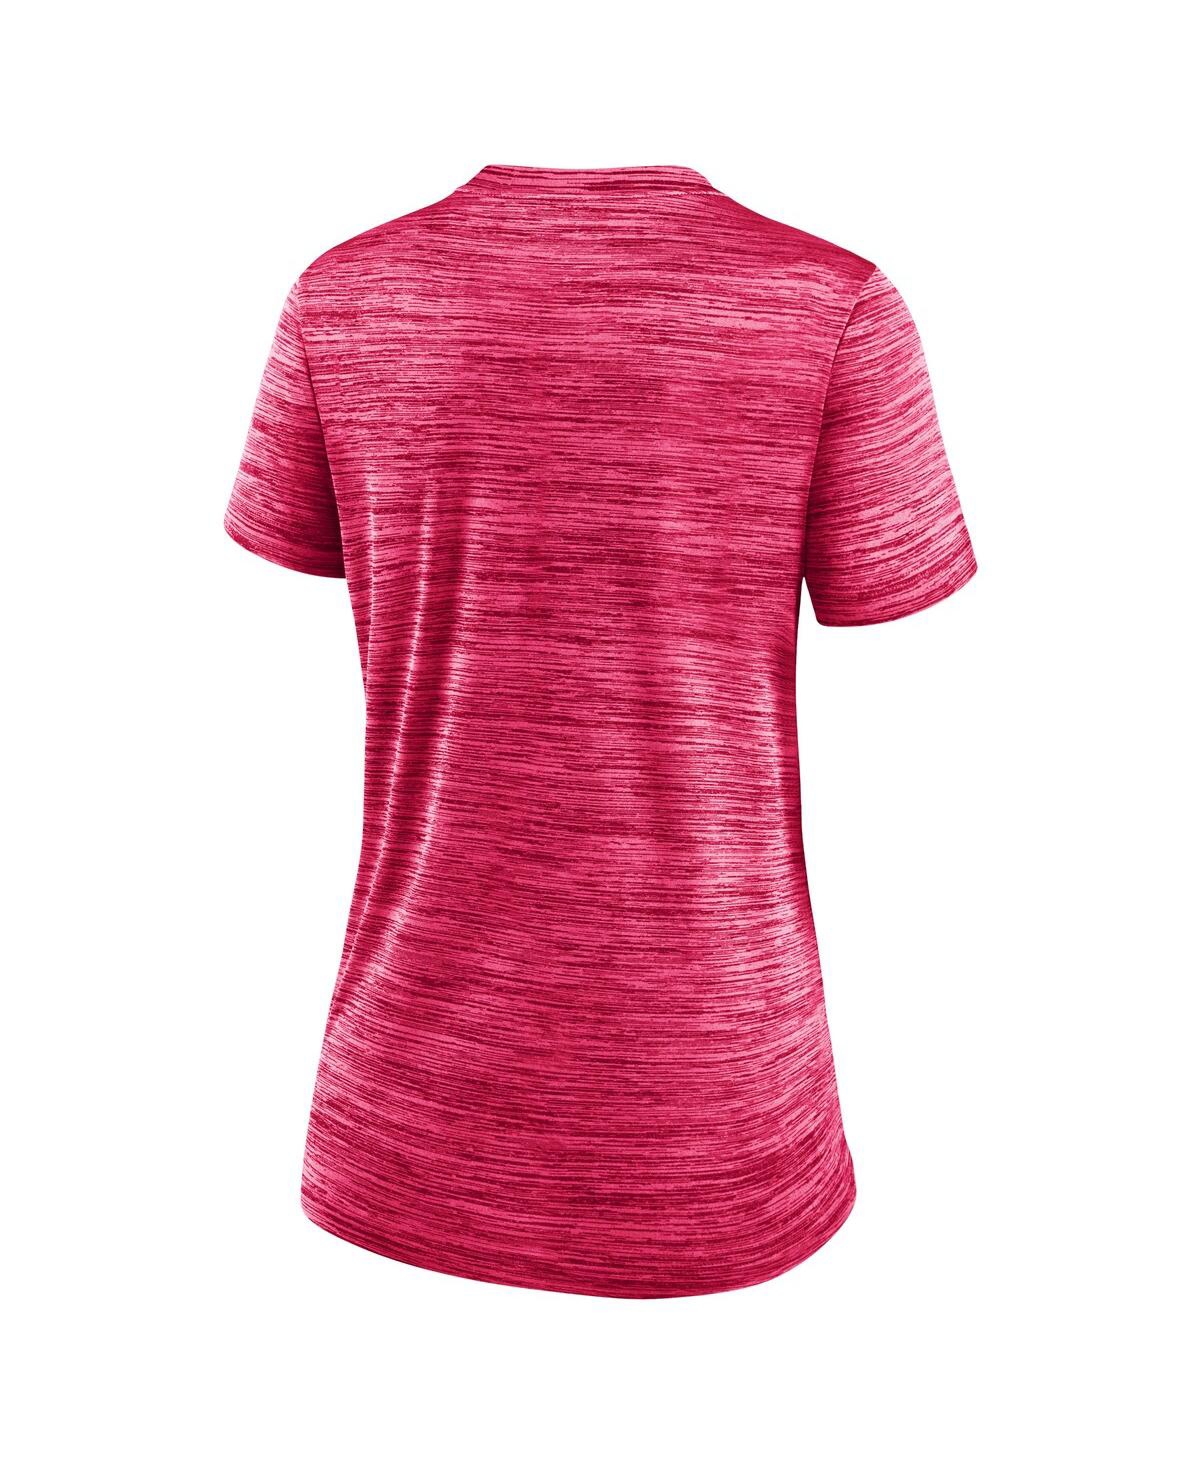 Shop Nike Women's  Pink San Diego Padres City Connect Velocity Practice Performance V-neck T-shirt